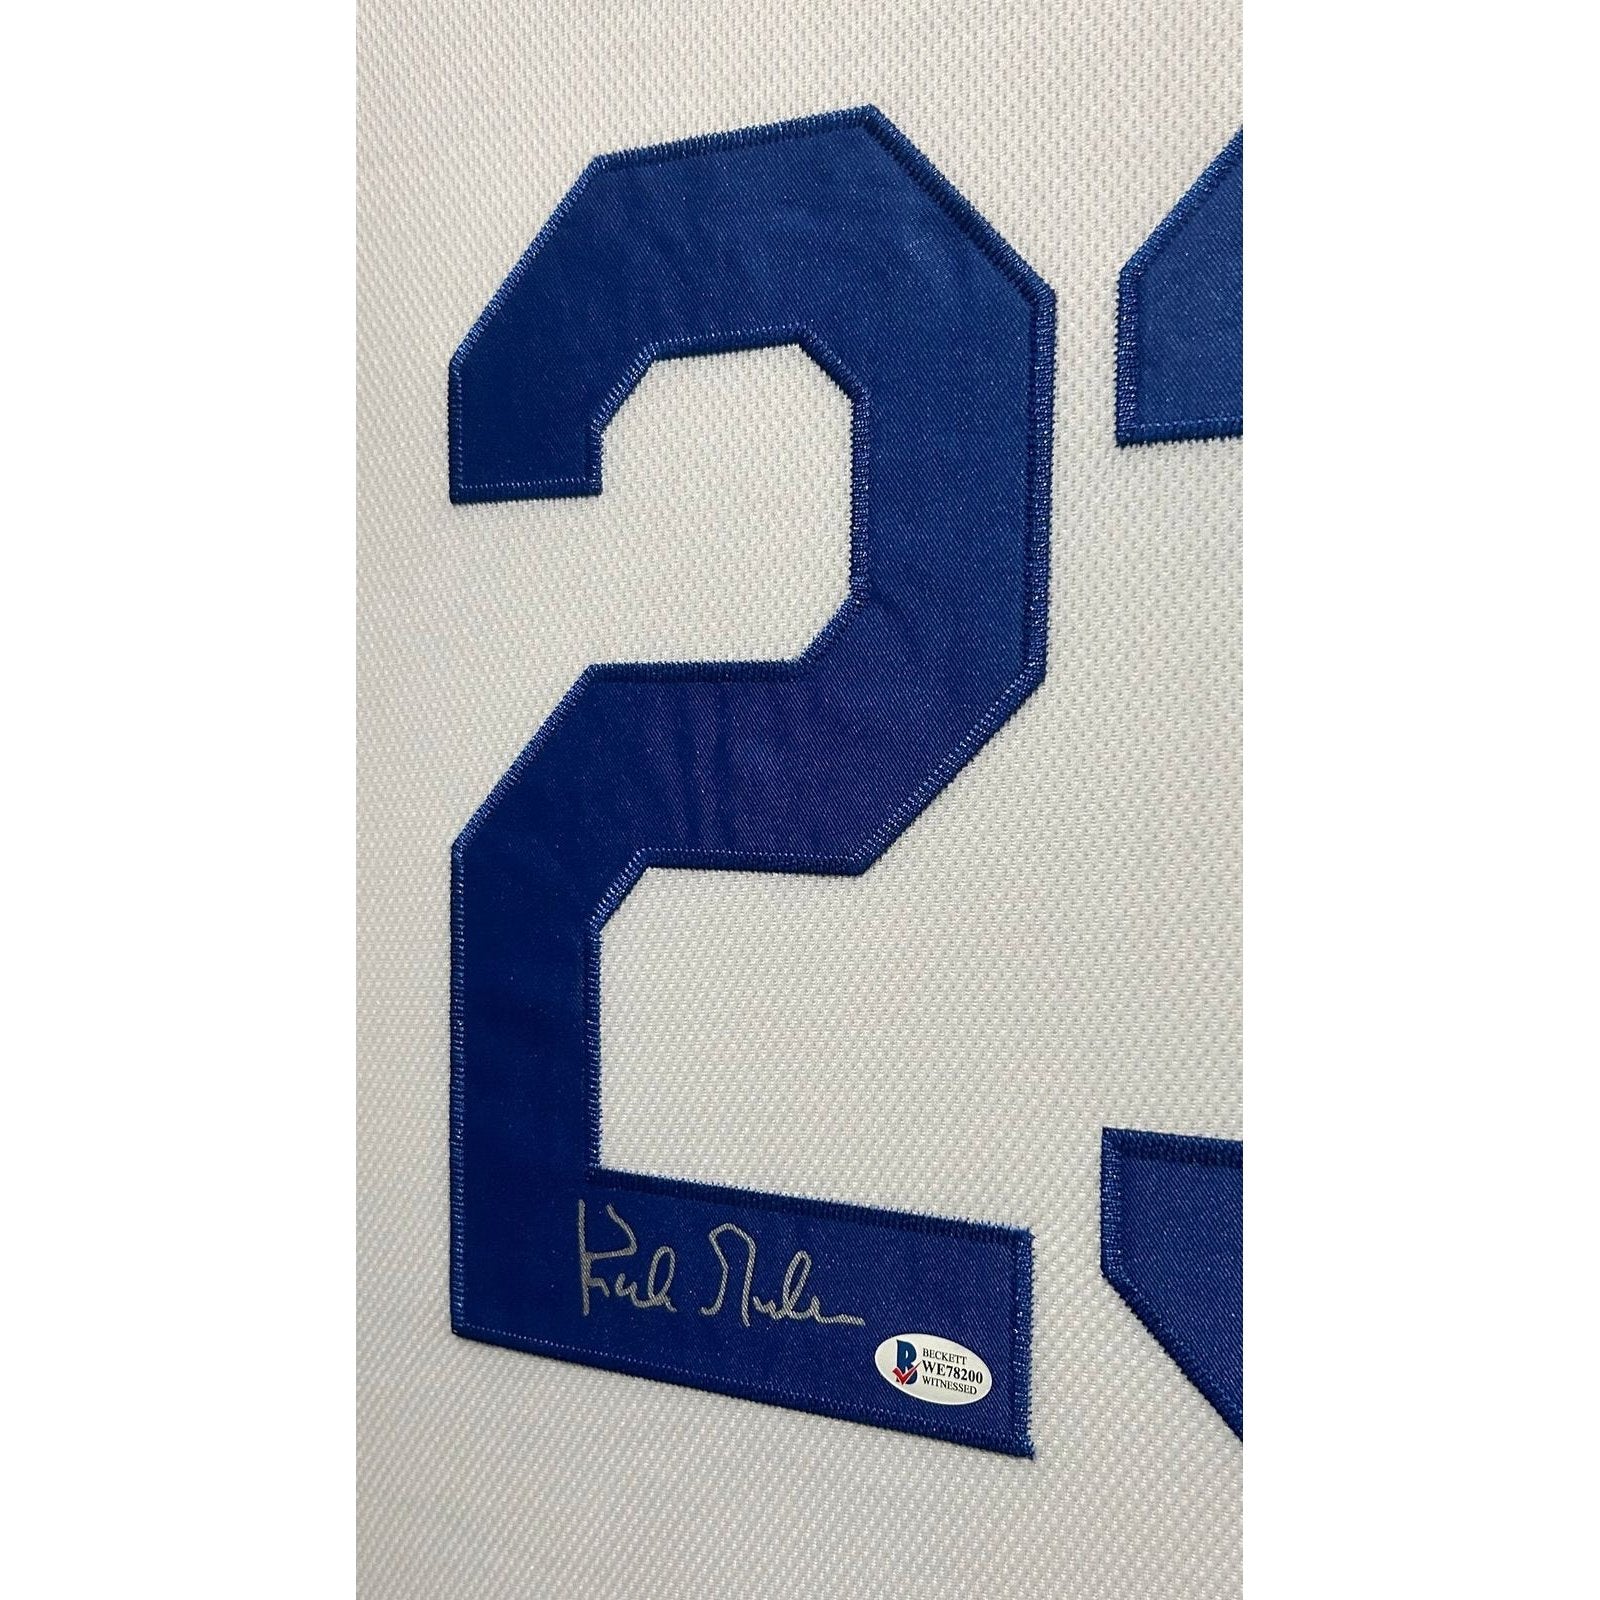 Kirk Gibson Autographed Signed Framed Detroit Tigers Jersey 